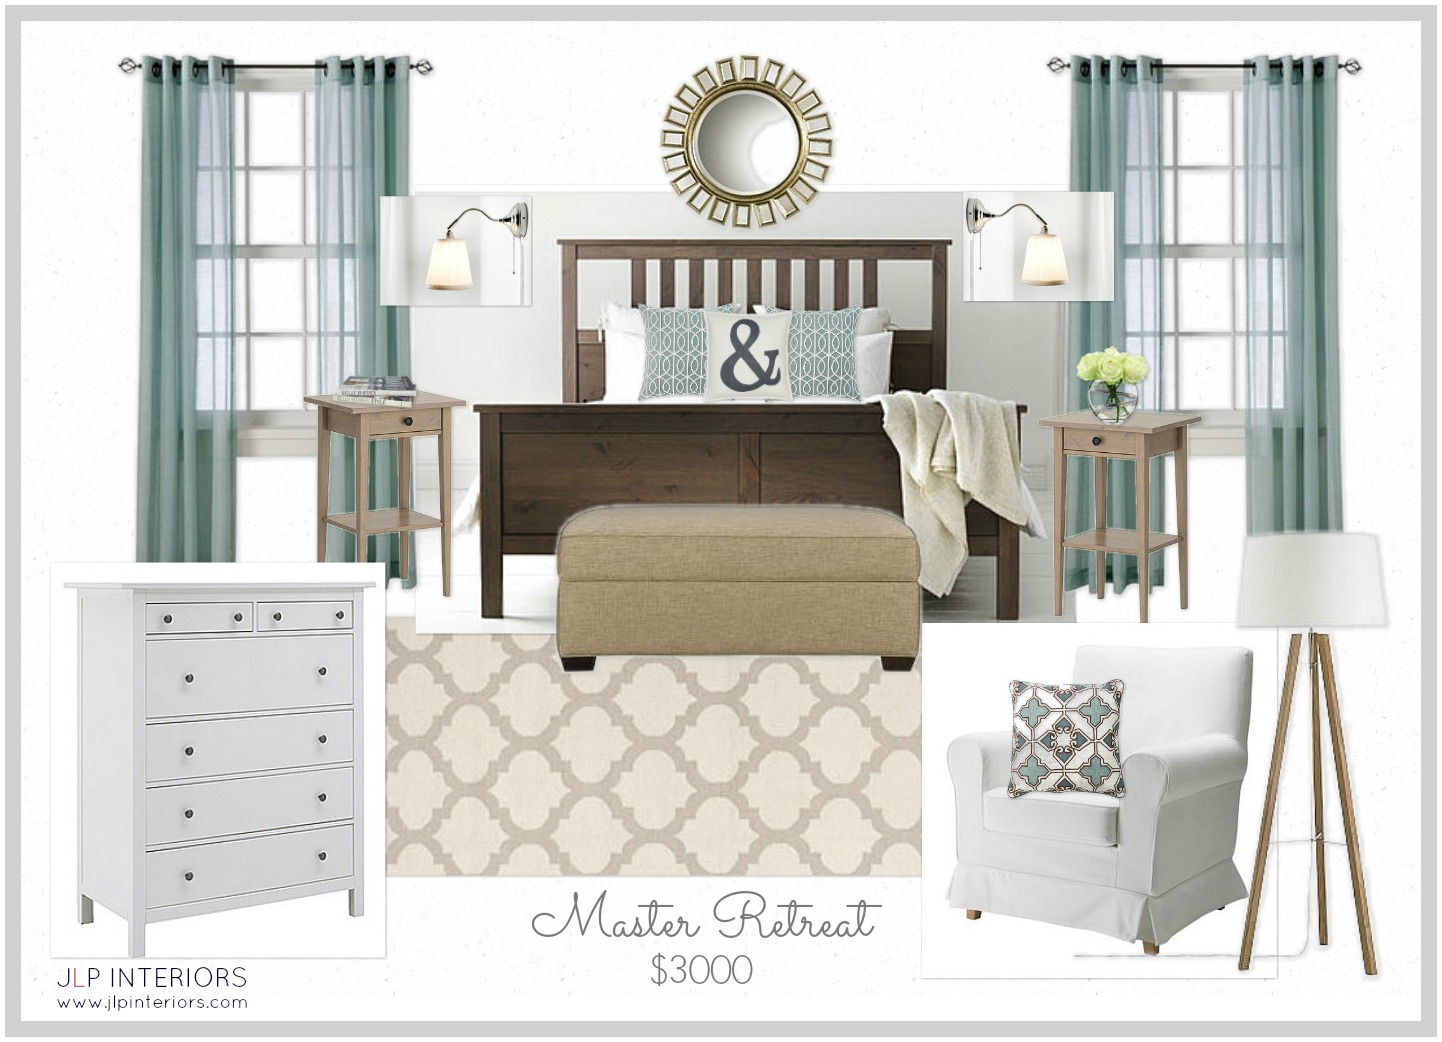 Home with Baxter: Mood Board Monday! (Master Bedroom Retreat)